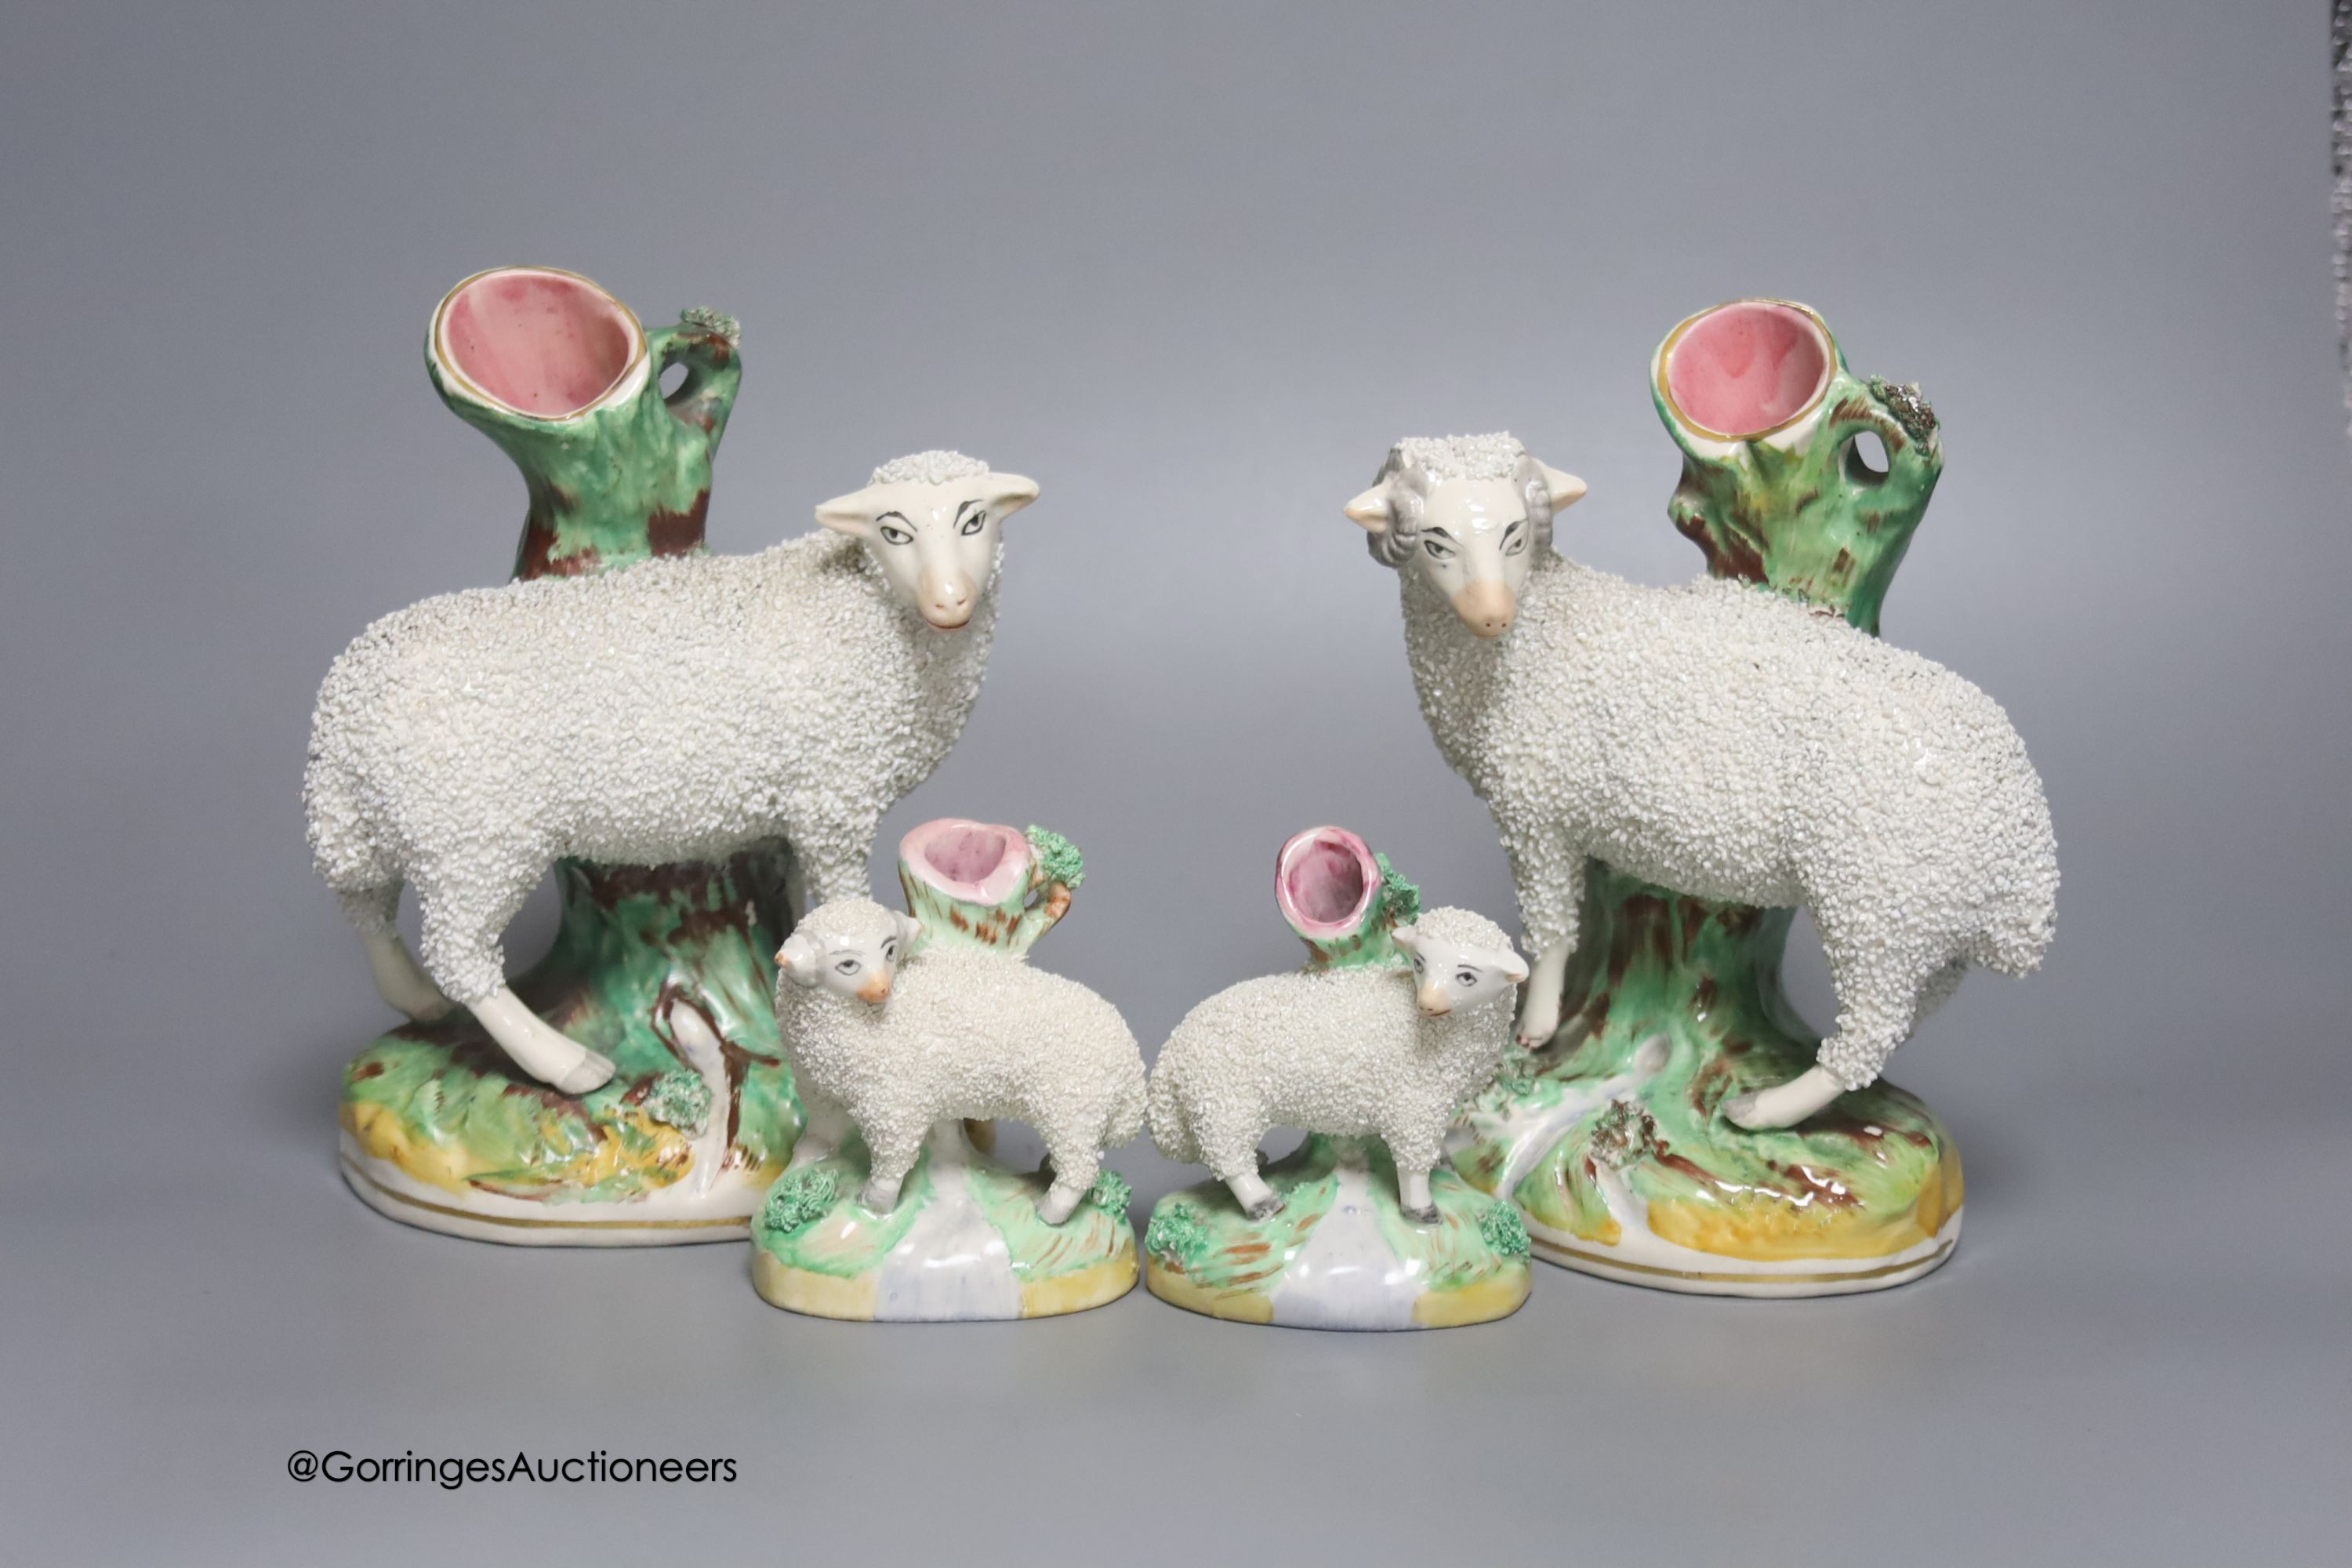 A pair of Staffordshire sheep and a smaller similar pair